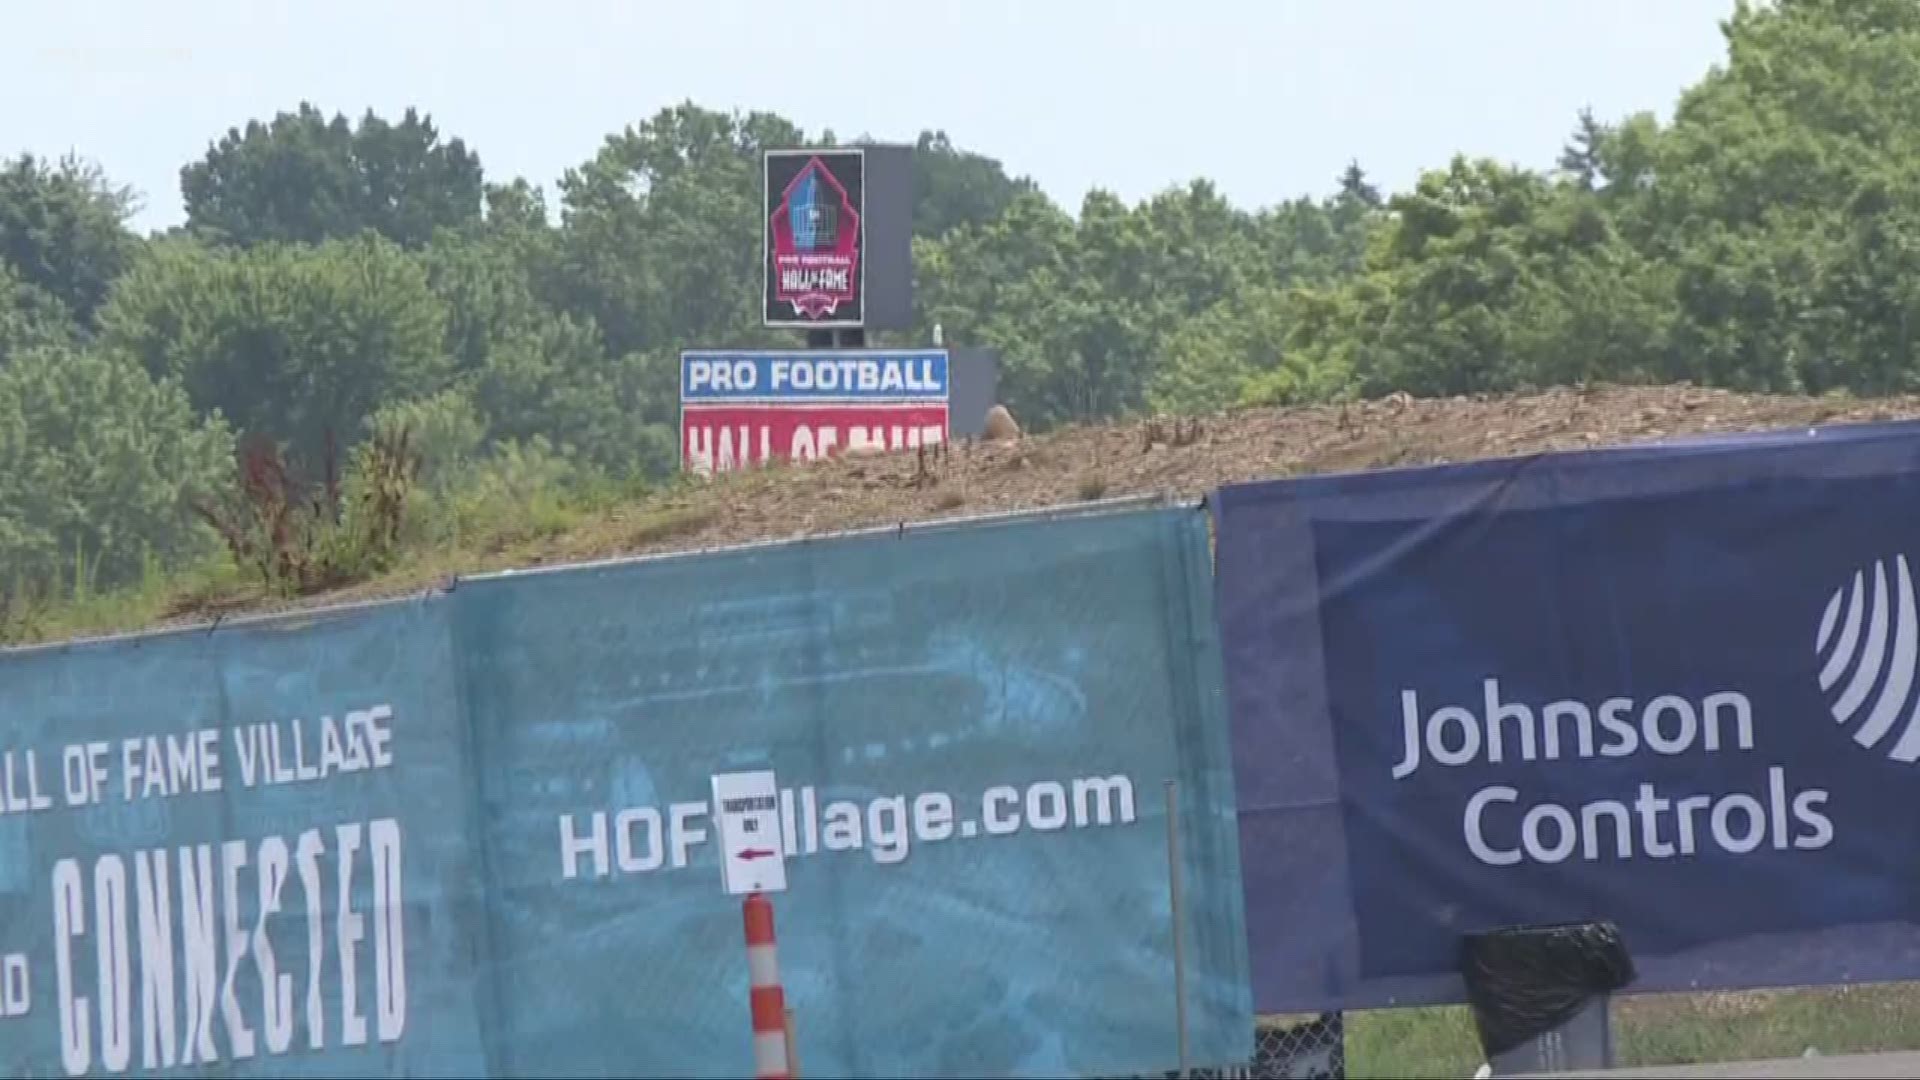 Phase Two of the Hall of Fame Village project is said to begin soon – but those who live nearby point out that phase one, which included rebuilding the stadium, is all that's done -- and they're getting frustrated.